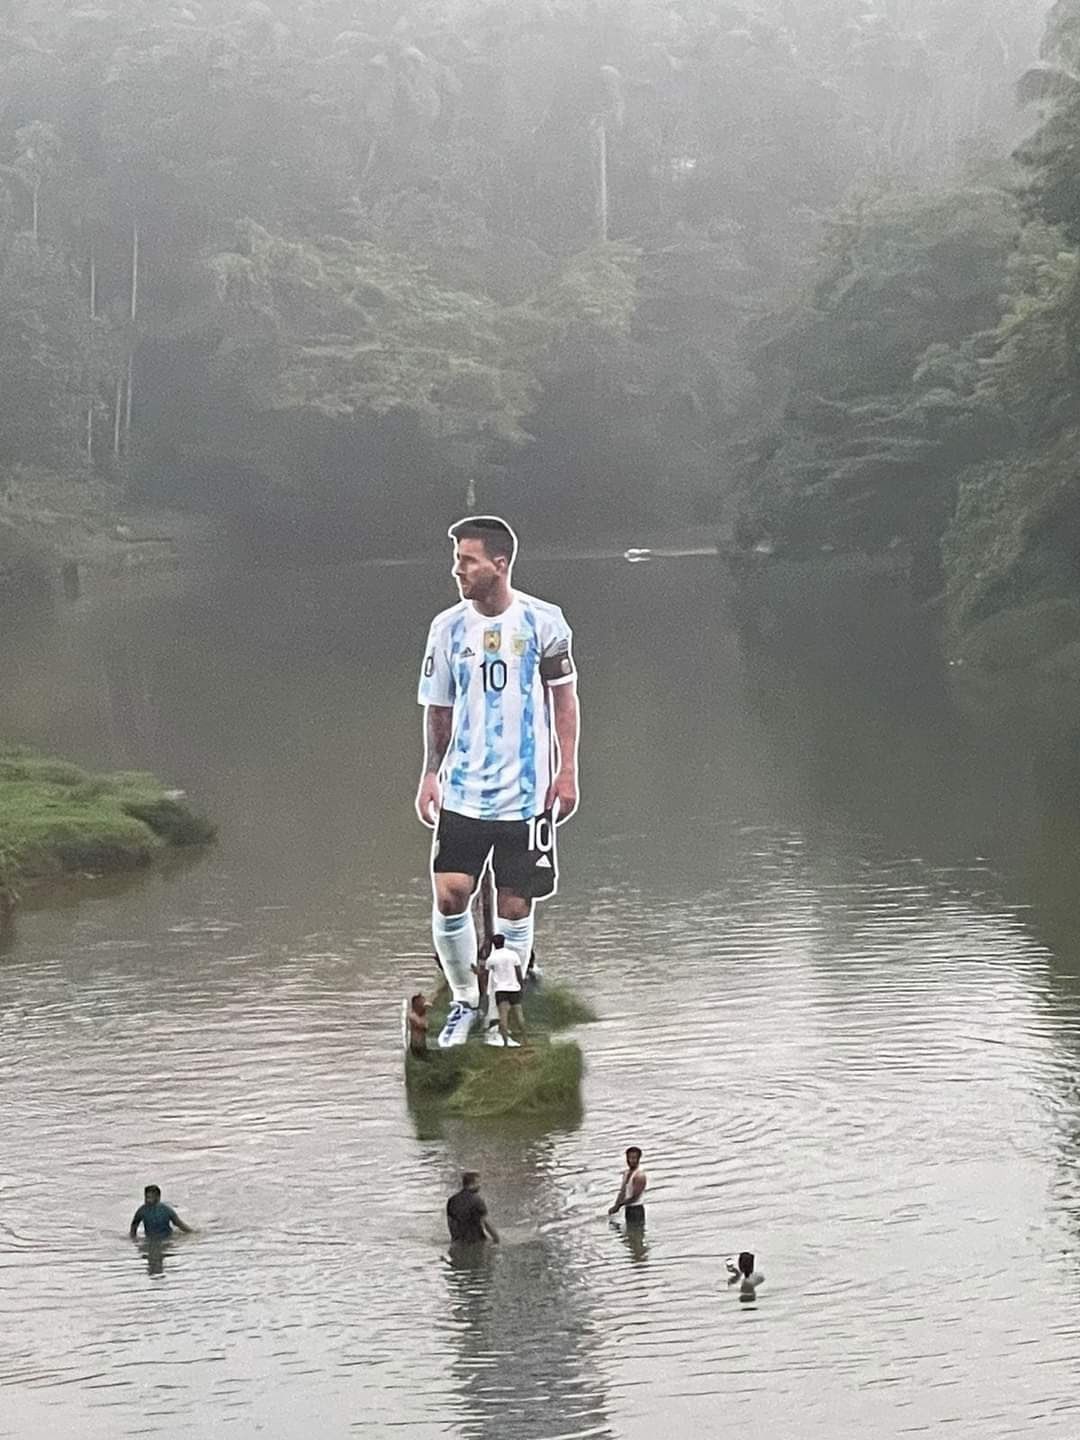 A 30-feet cut-out of Argentina football captain Lionel Messi was installed in the middle of a Kerala river by football fans from Pullavoor, Kozhikode